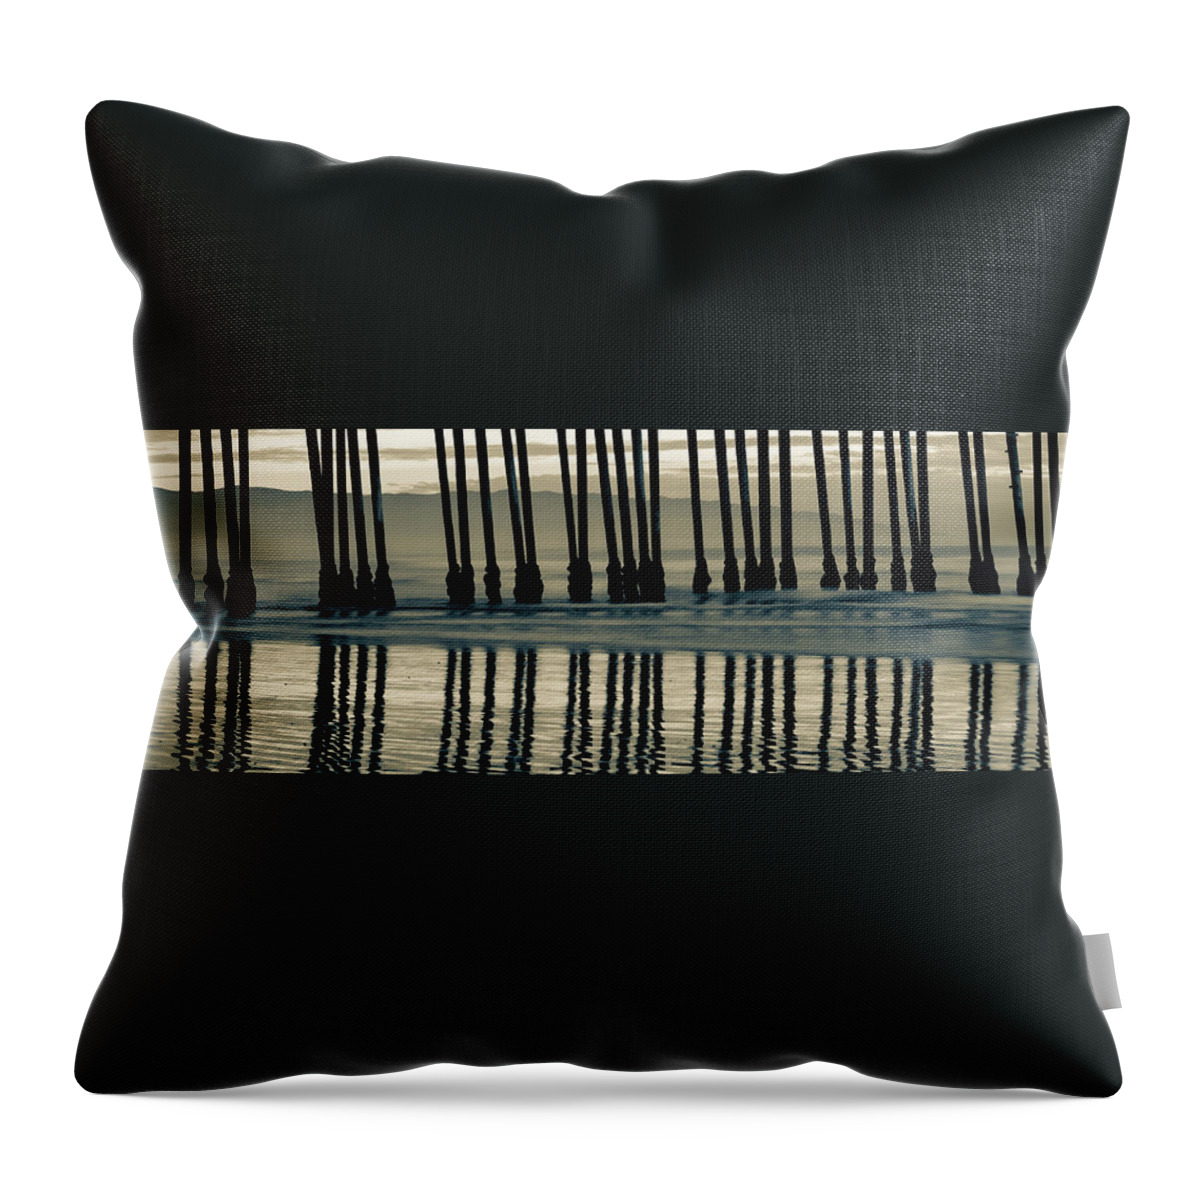 Pismo Beach Panorama Throw Pillow featuring the photograph Panoramic Pismo Beach Pier Pilings - Sepia by Gregory Ballos